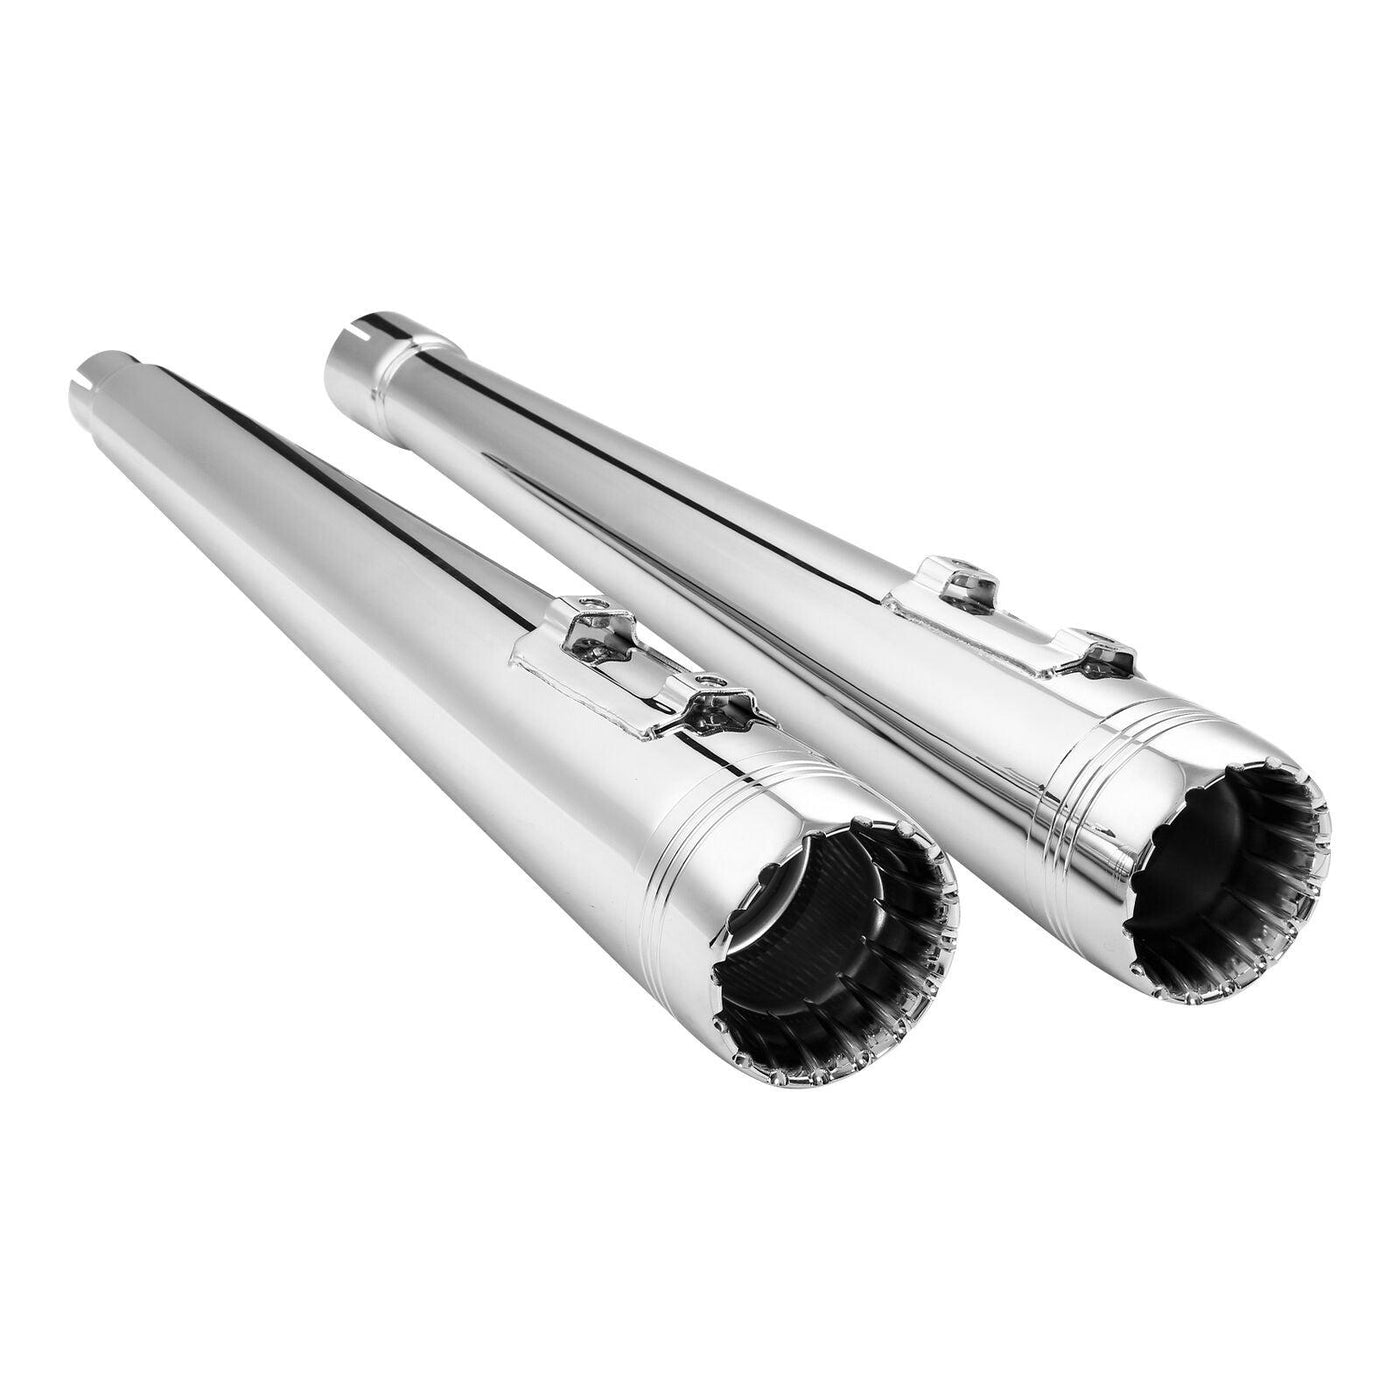 Chrome Megaphone Tappered Slip On Exhaust Pipes Fit For Harley Road King 17-22 - Moto Life Products